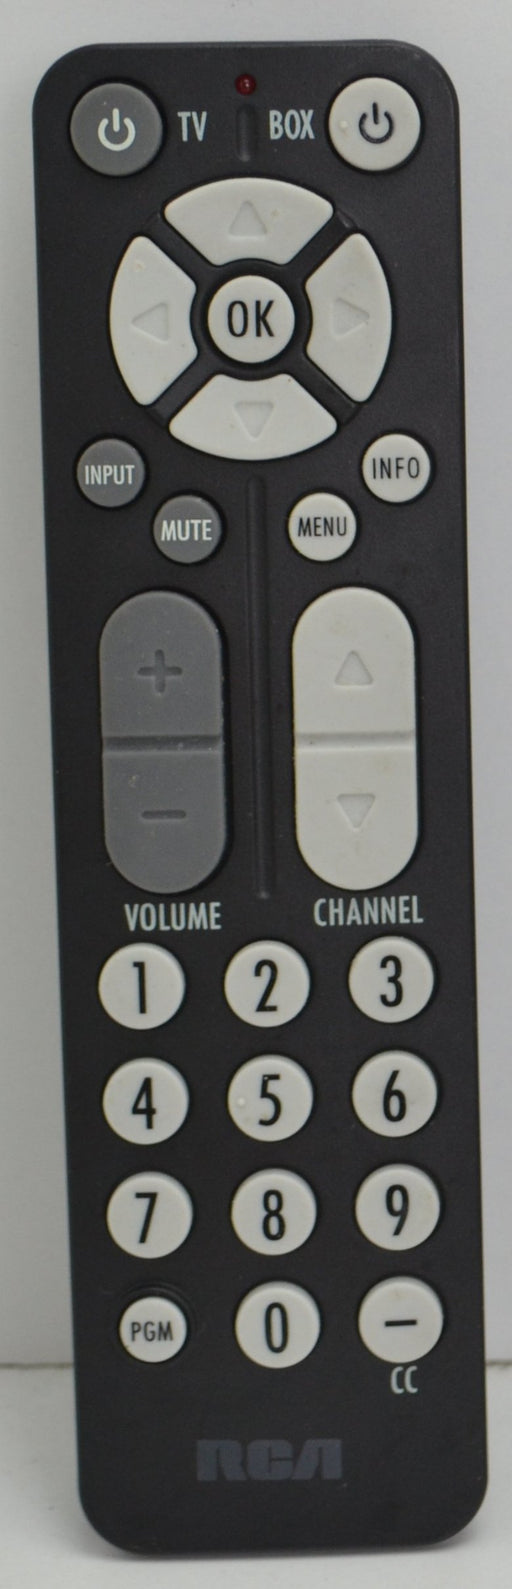 RCA TV Cable Box Remote Control Transmitter XY-2300 1-2-Remote-SpenCertified-refurbished-vintage-electonics